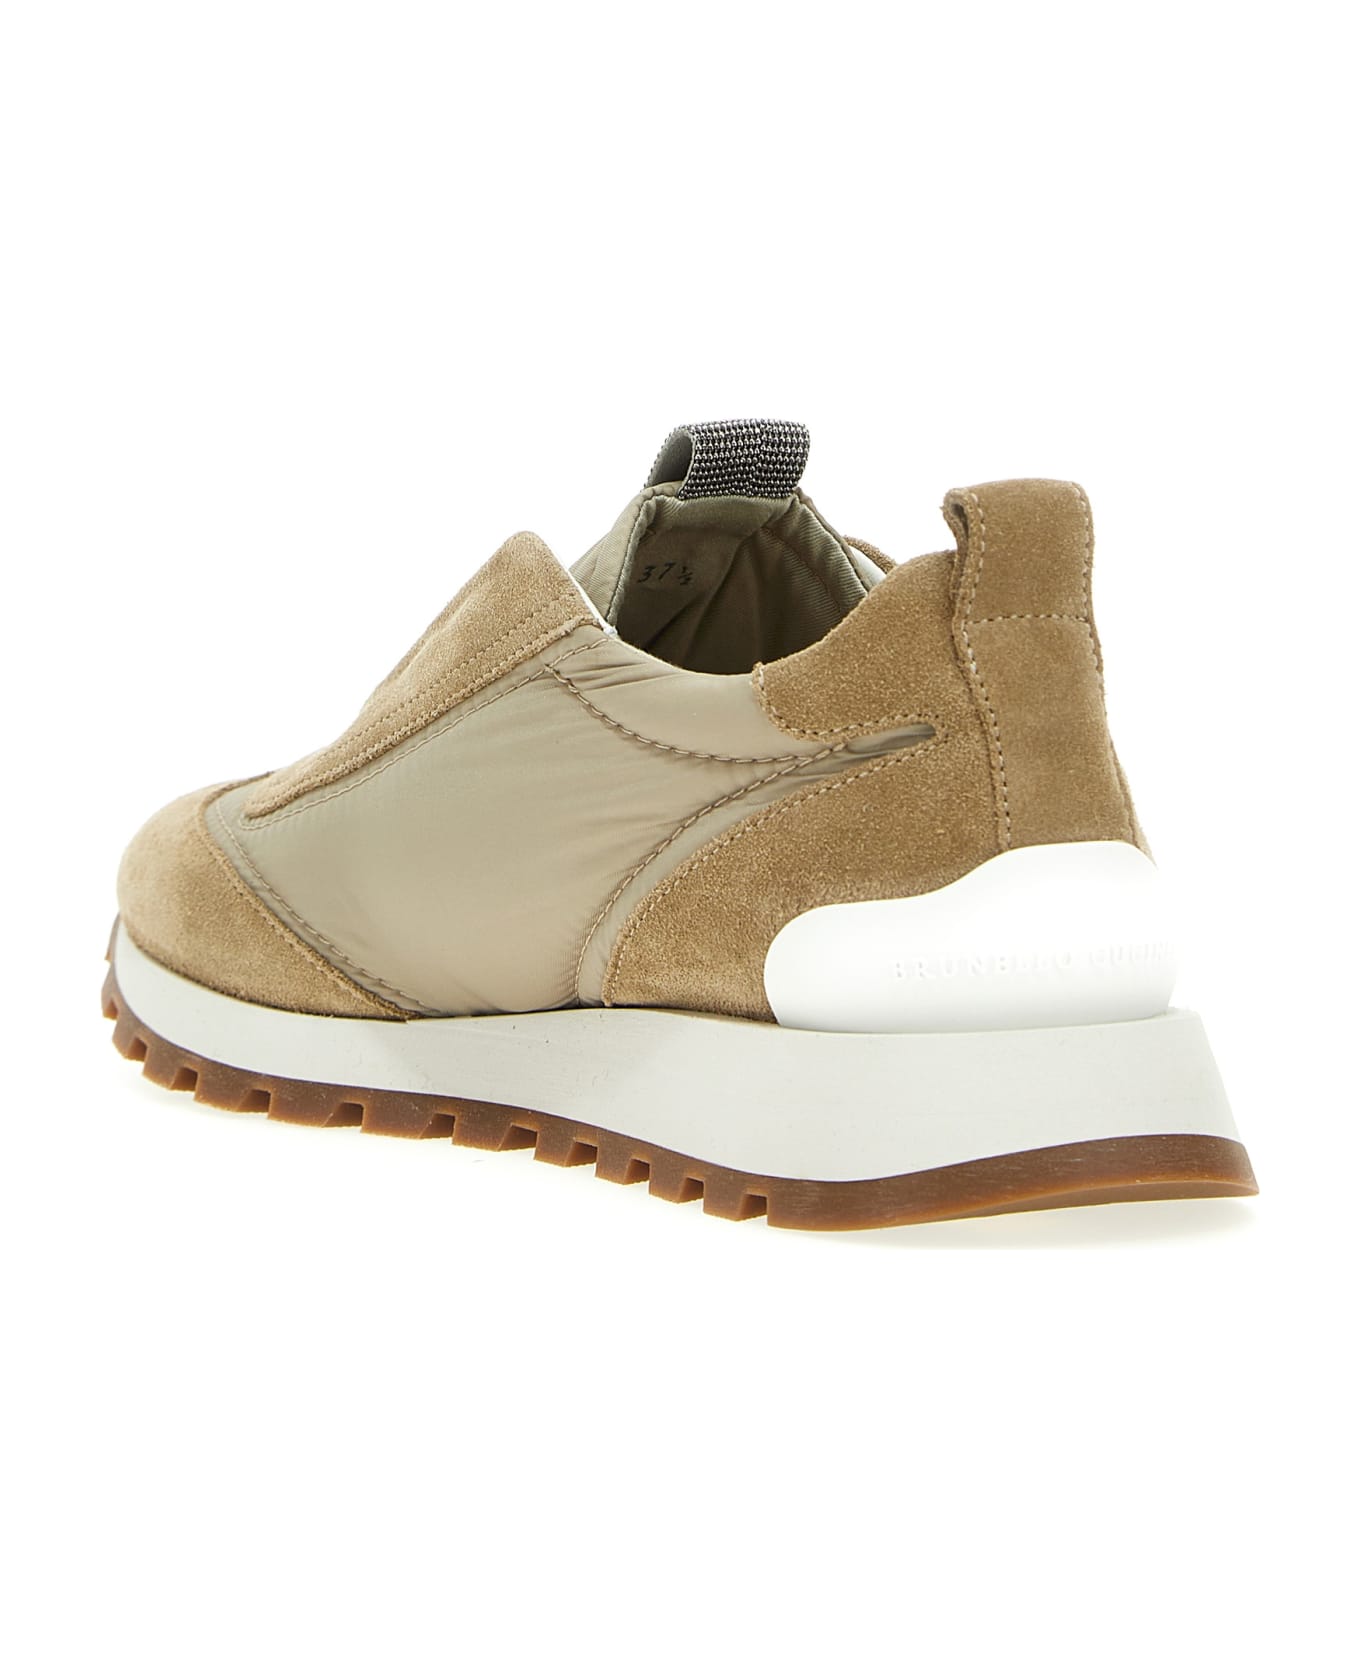 Brunello Cucinelli Runner Shoe In Suede And Taffeta Embellished With Threads Of Brilliant Monili - ROCK